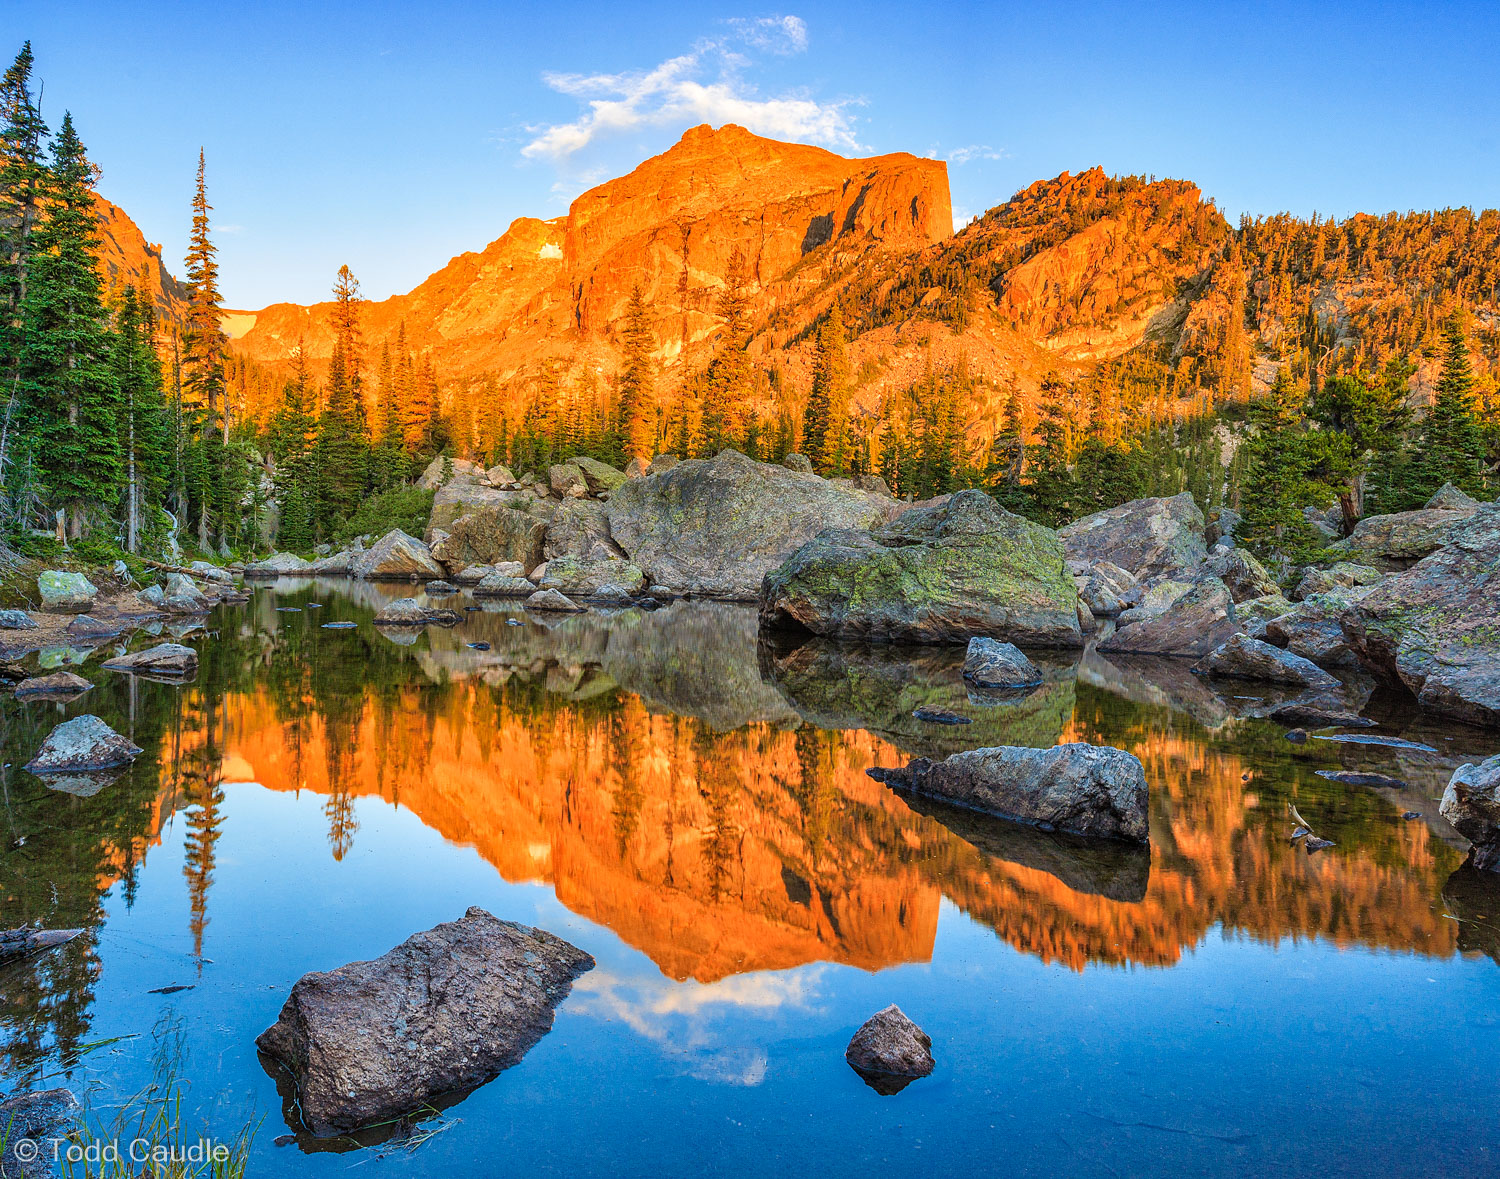 Flattop Mountain reflects in a rock-strewn tarn near the outlet of Lake Haiyaha at sunrise.